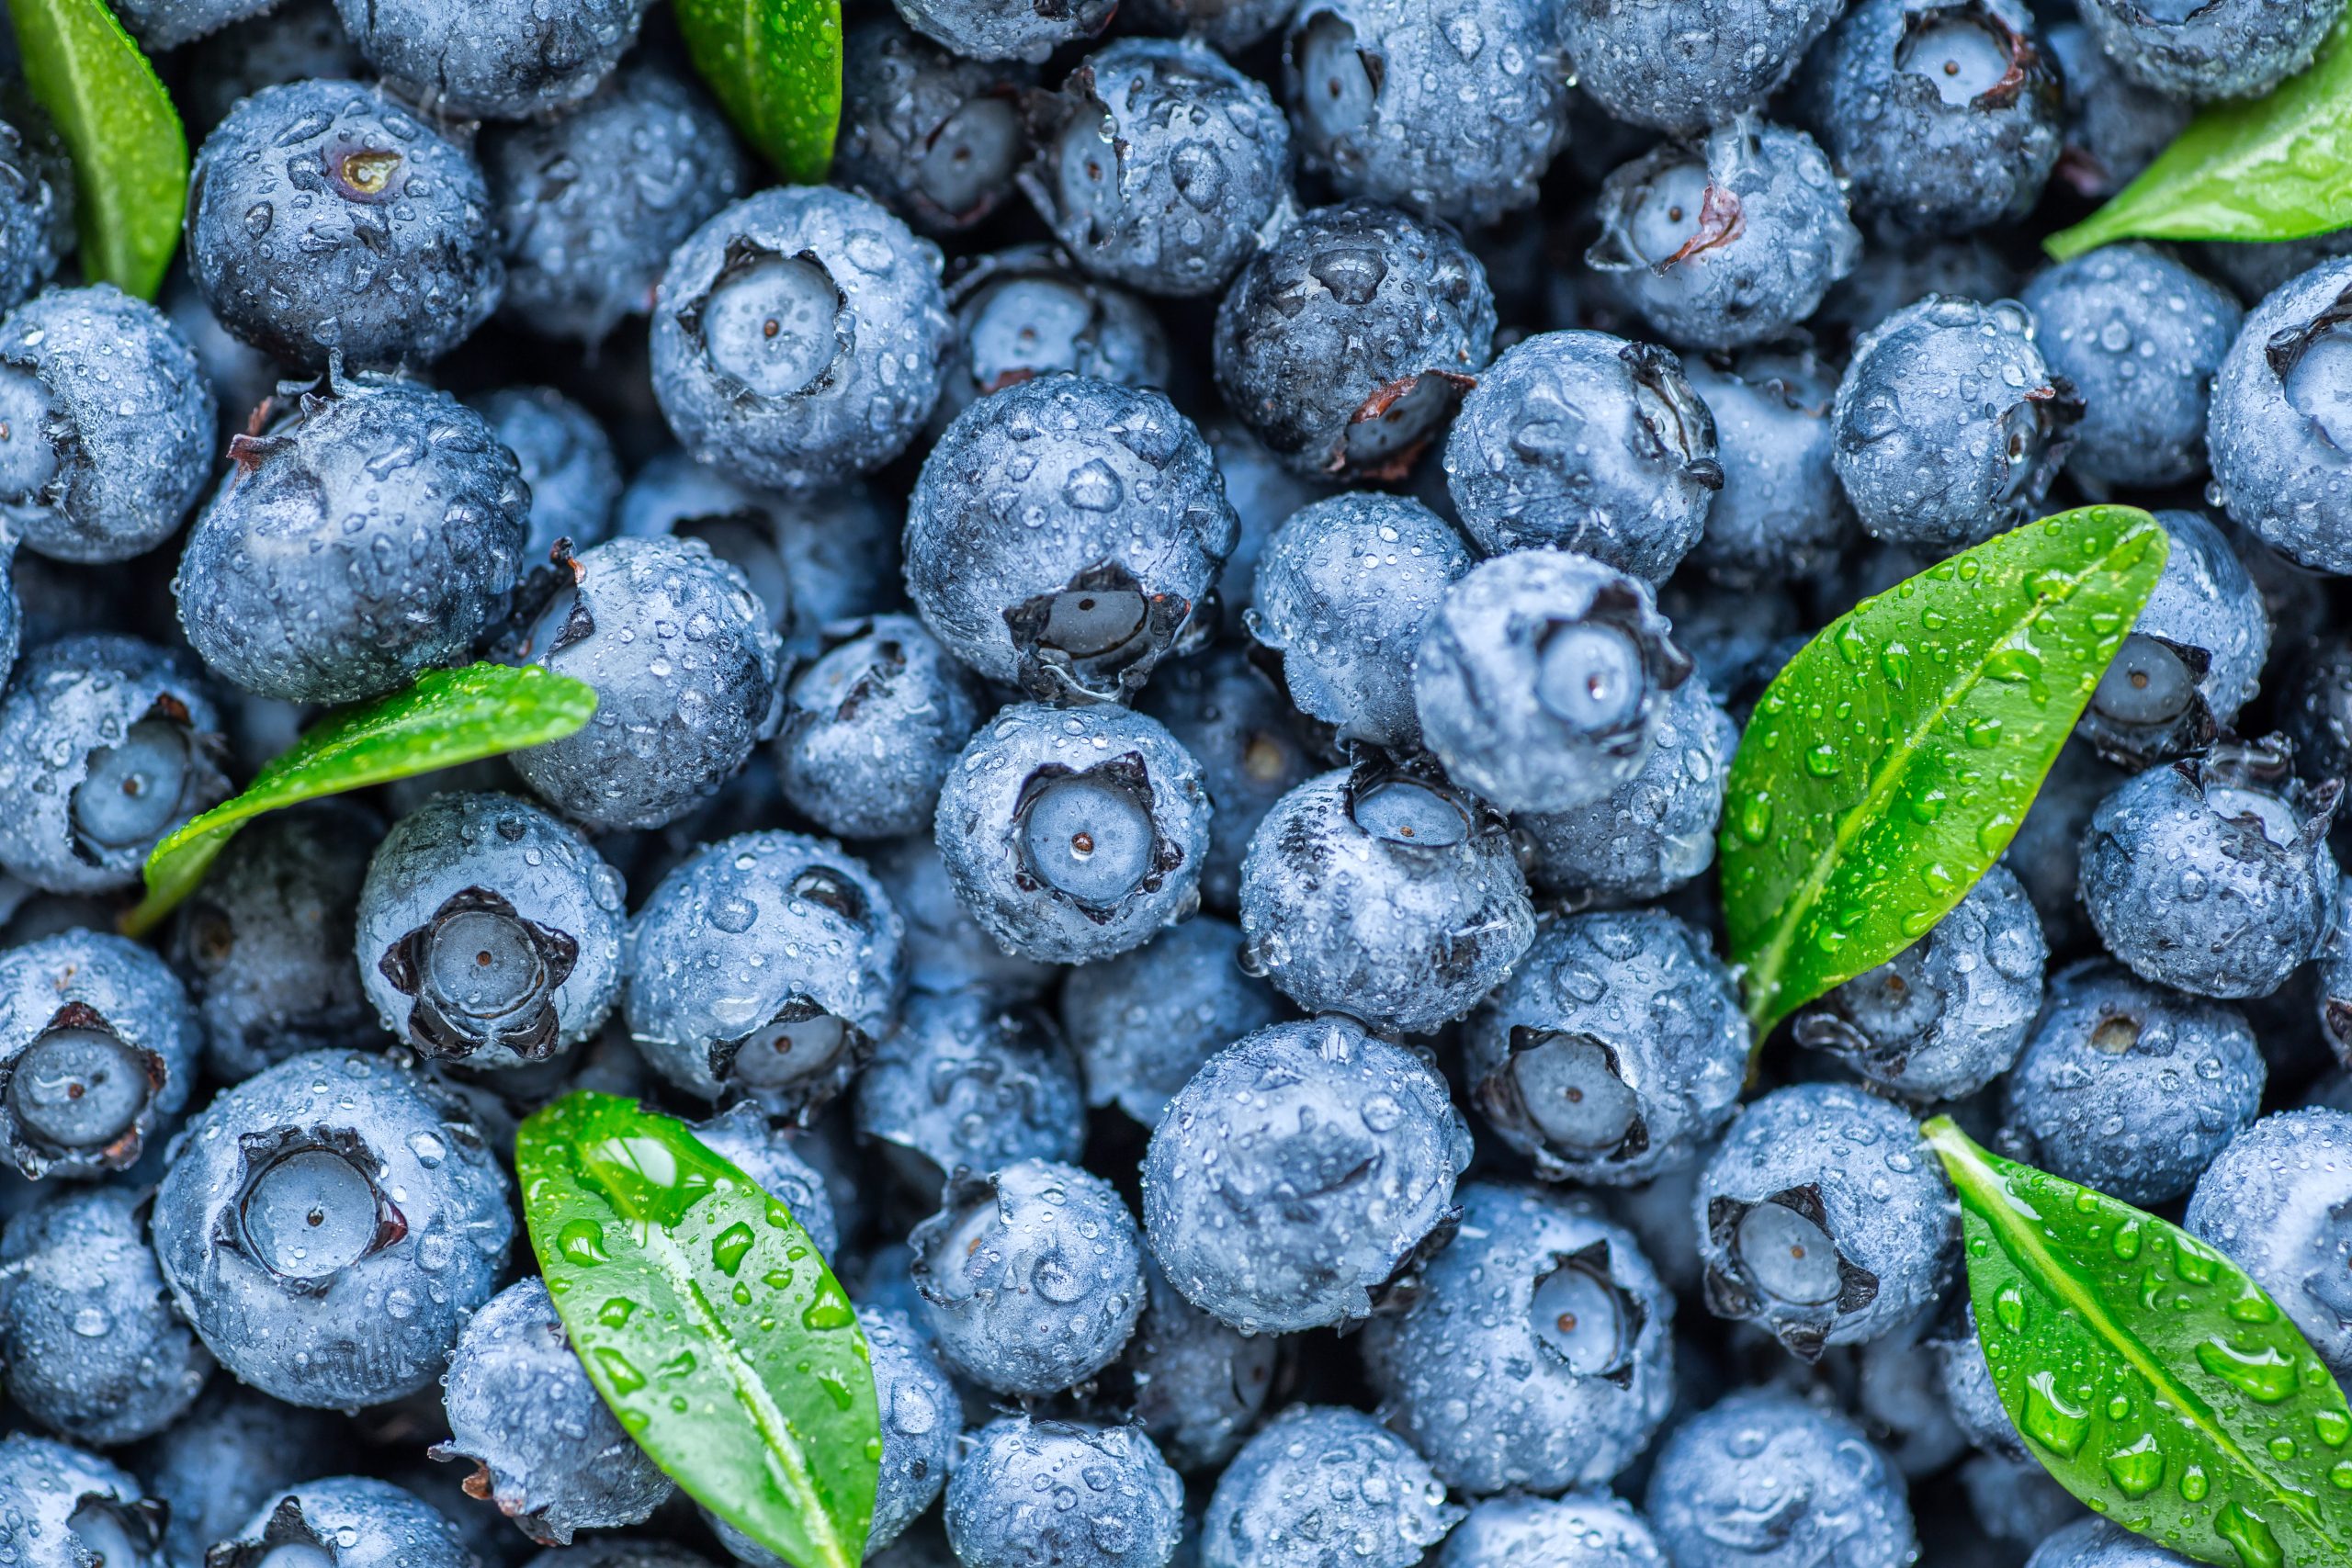 New study finds blueberries could be good for your heart